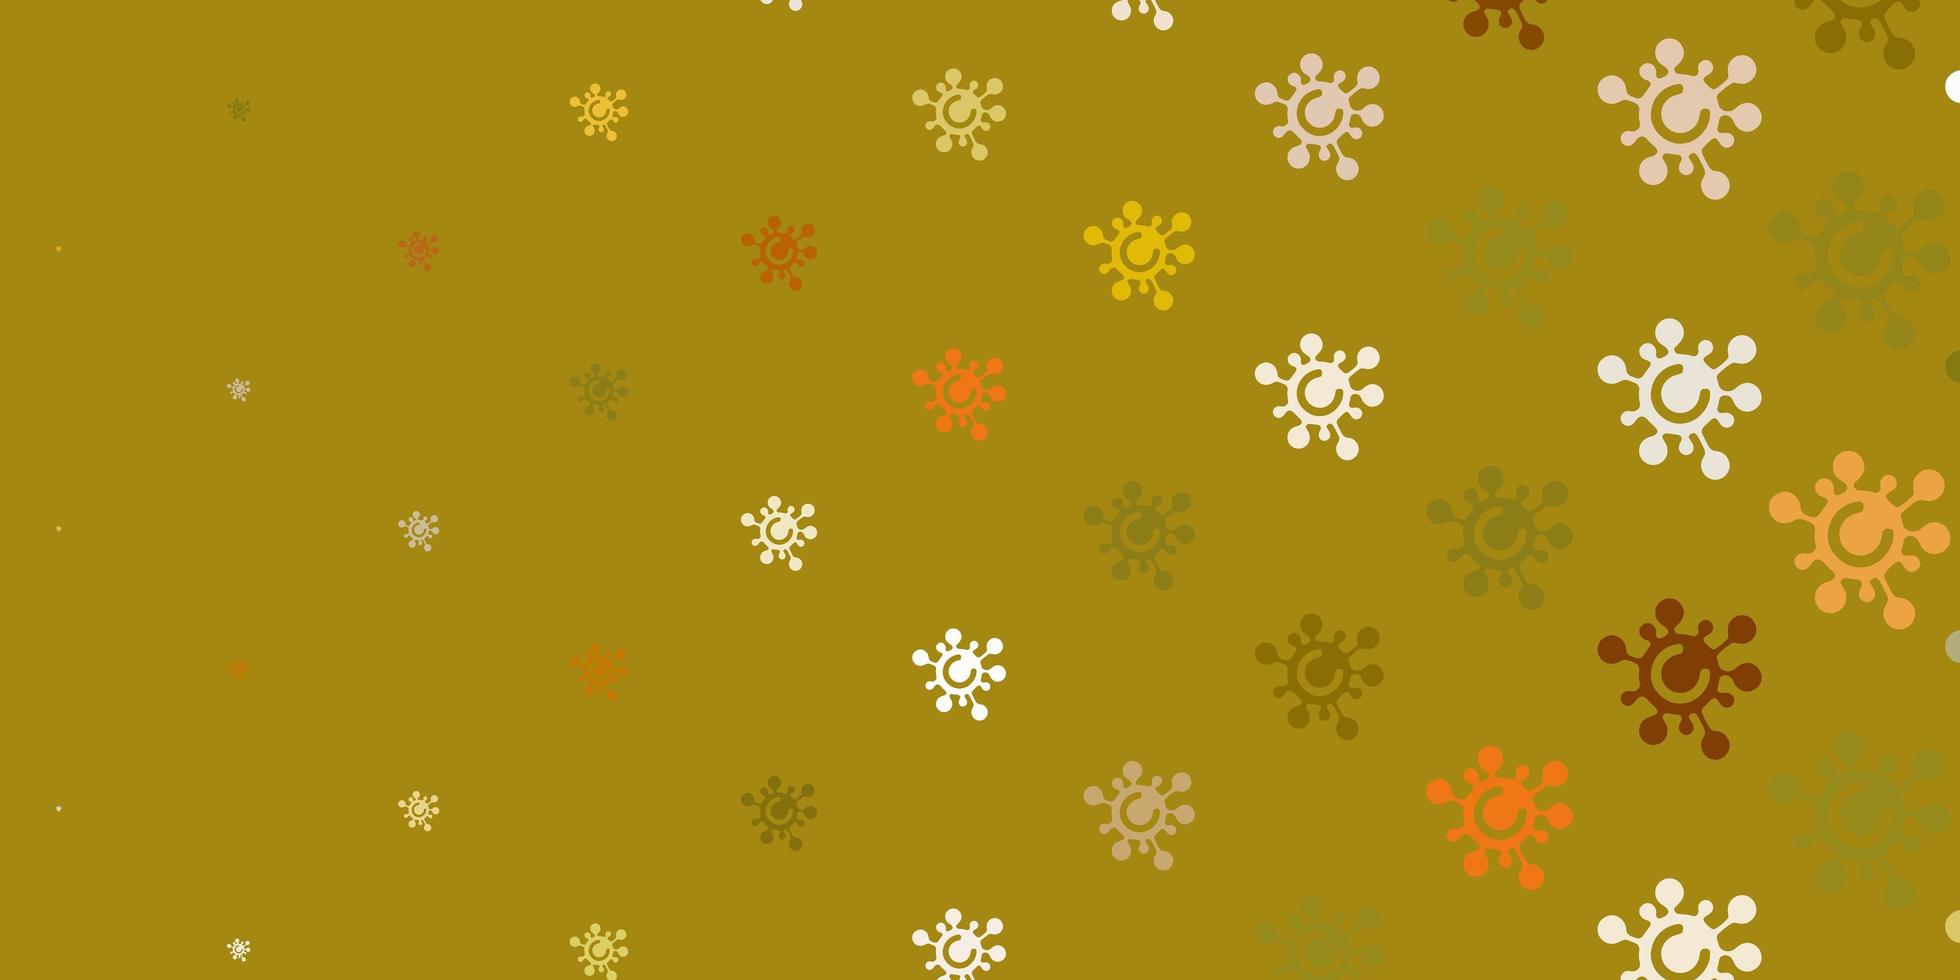 Light Green Yellow vector texture with disease symbols